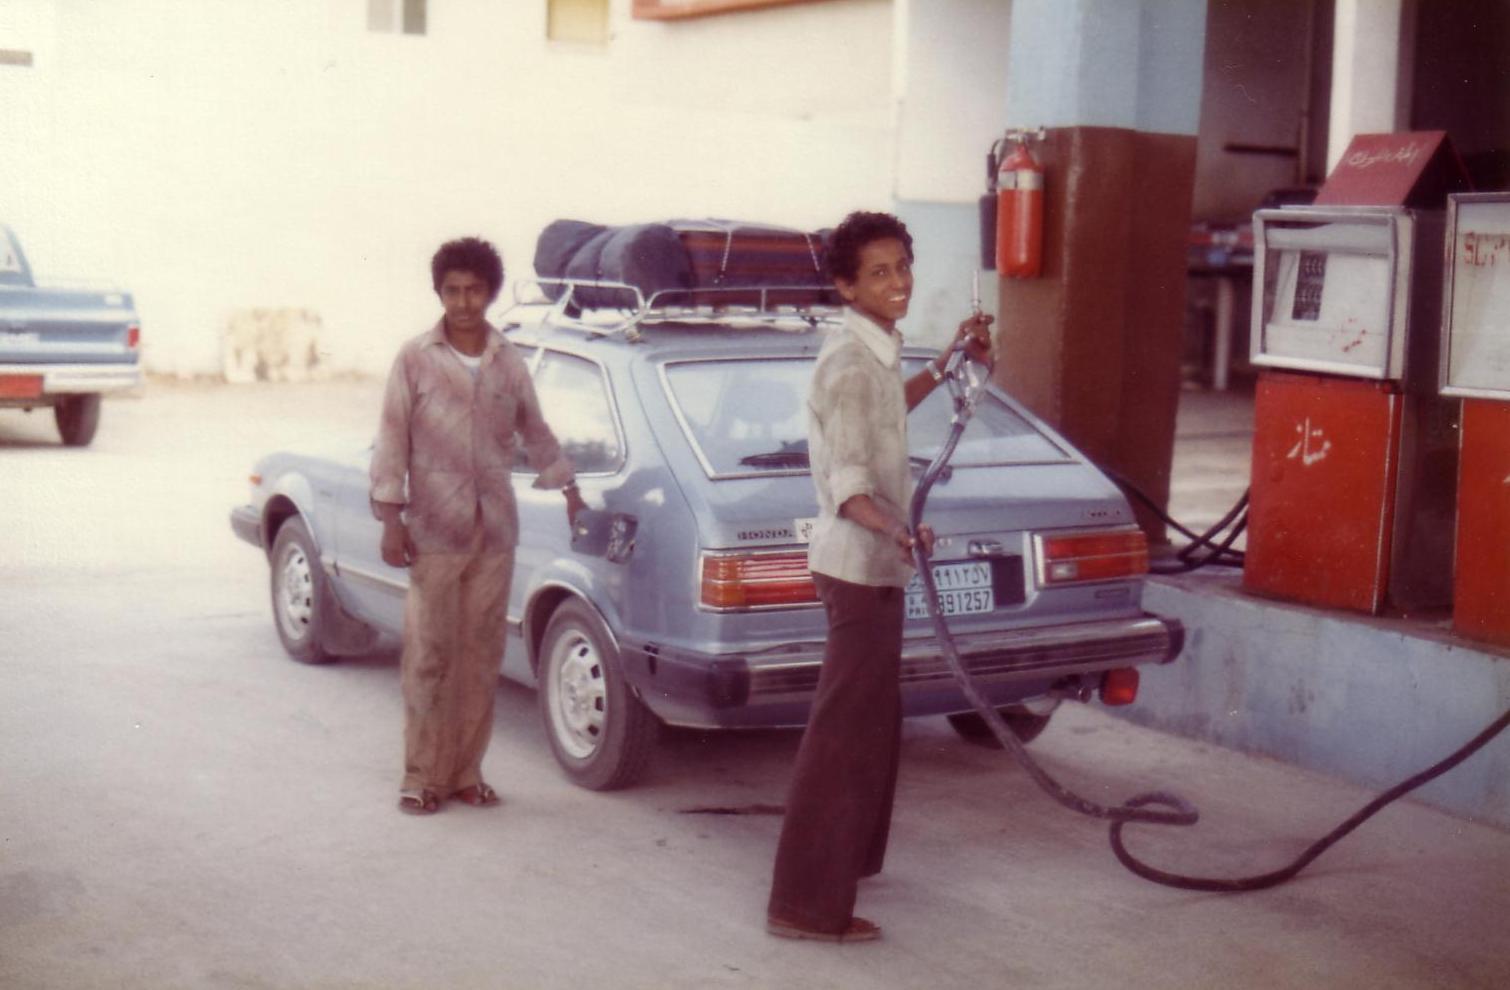 Filling the car in Taif